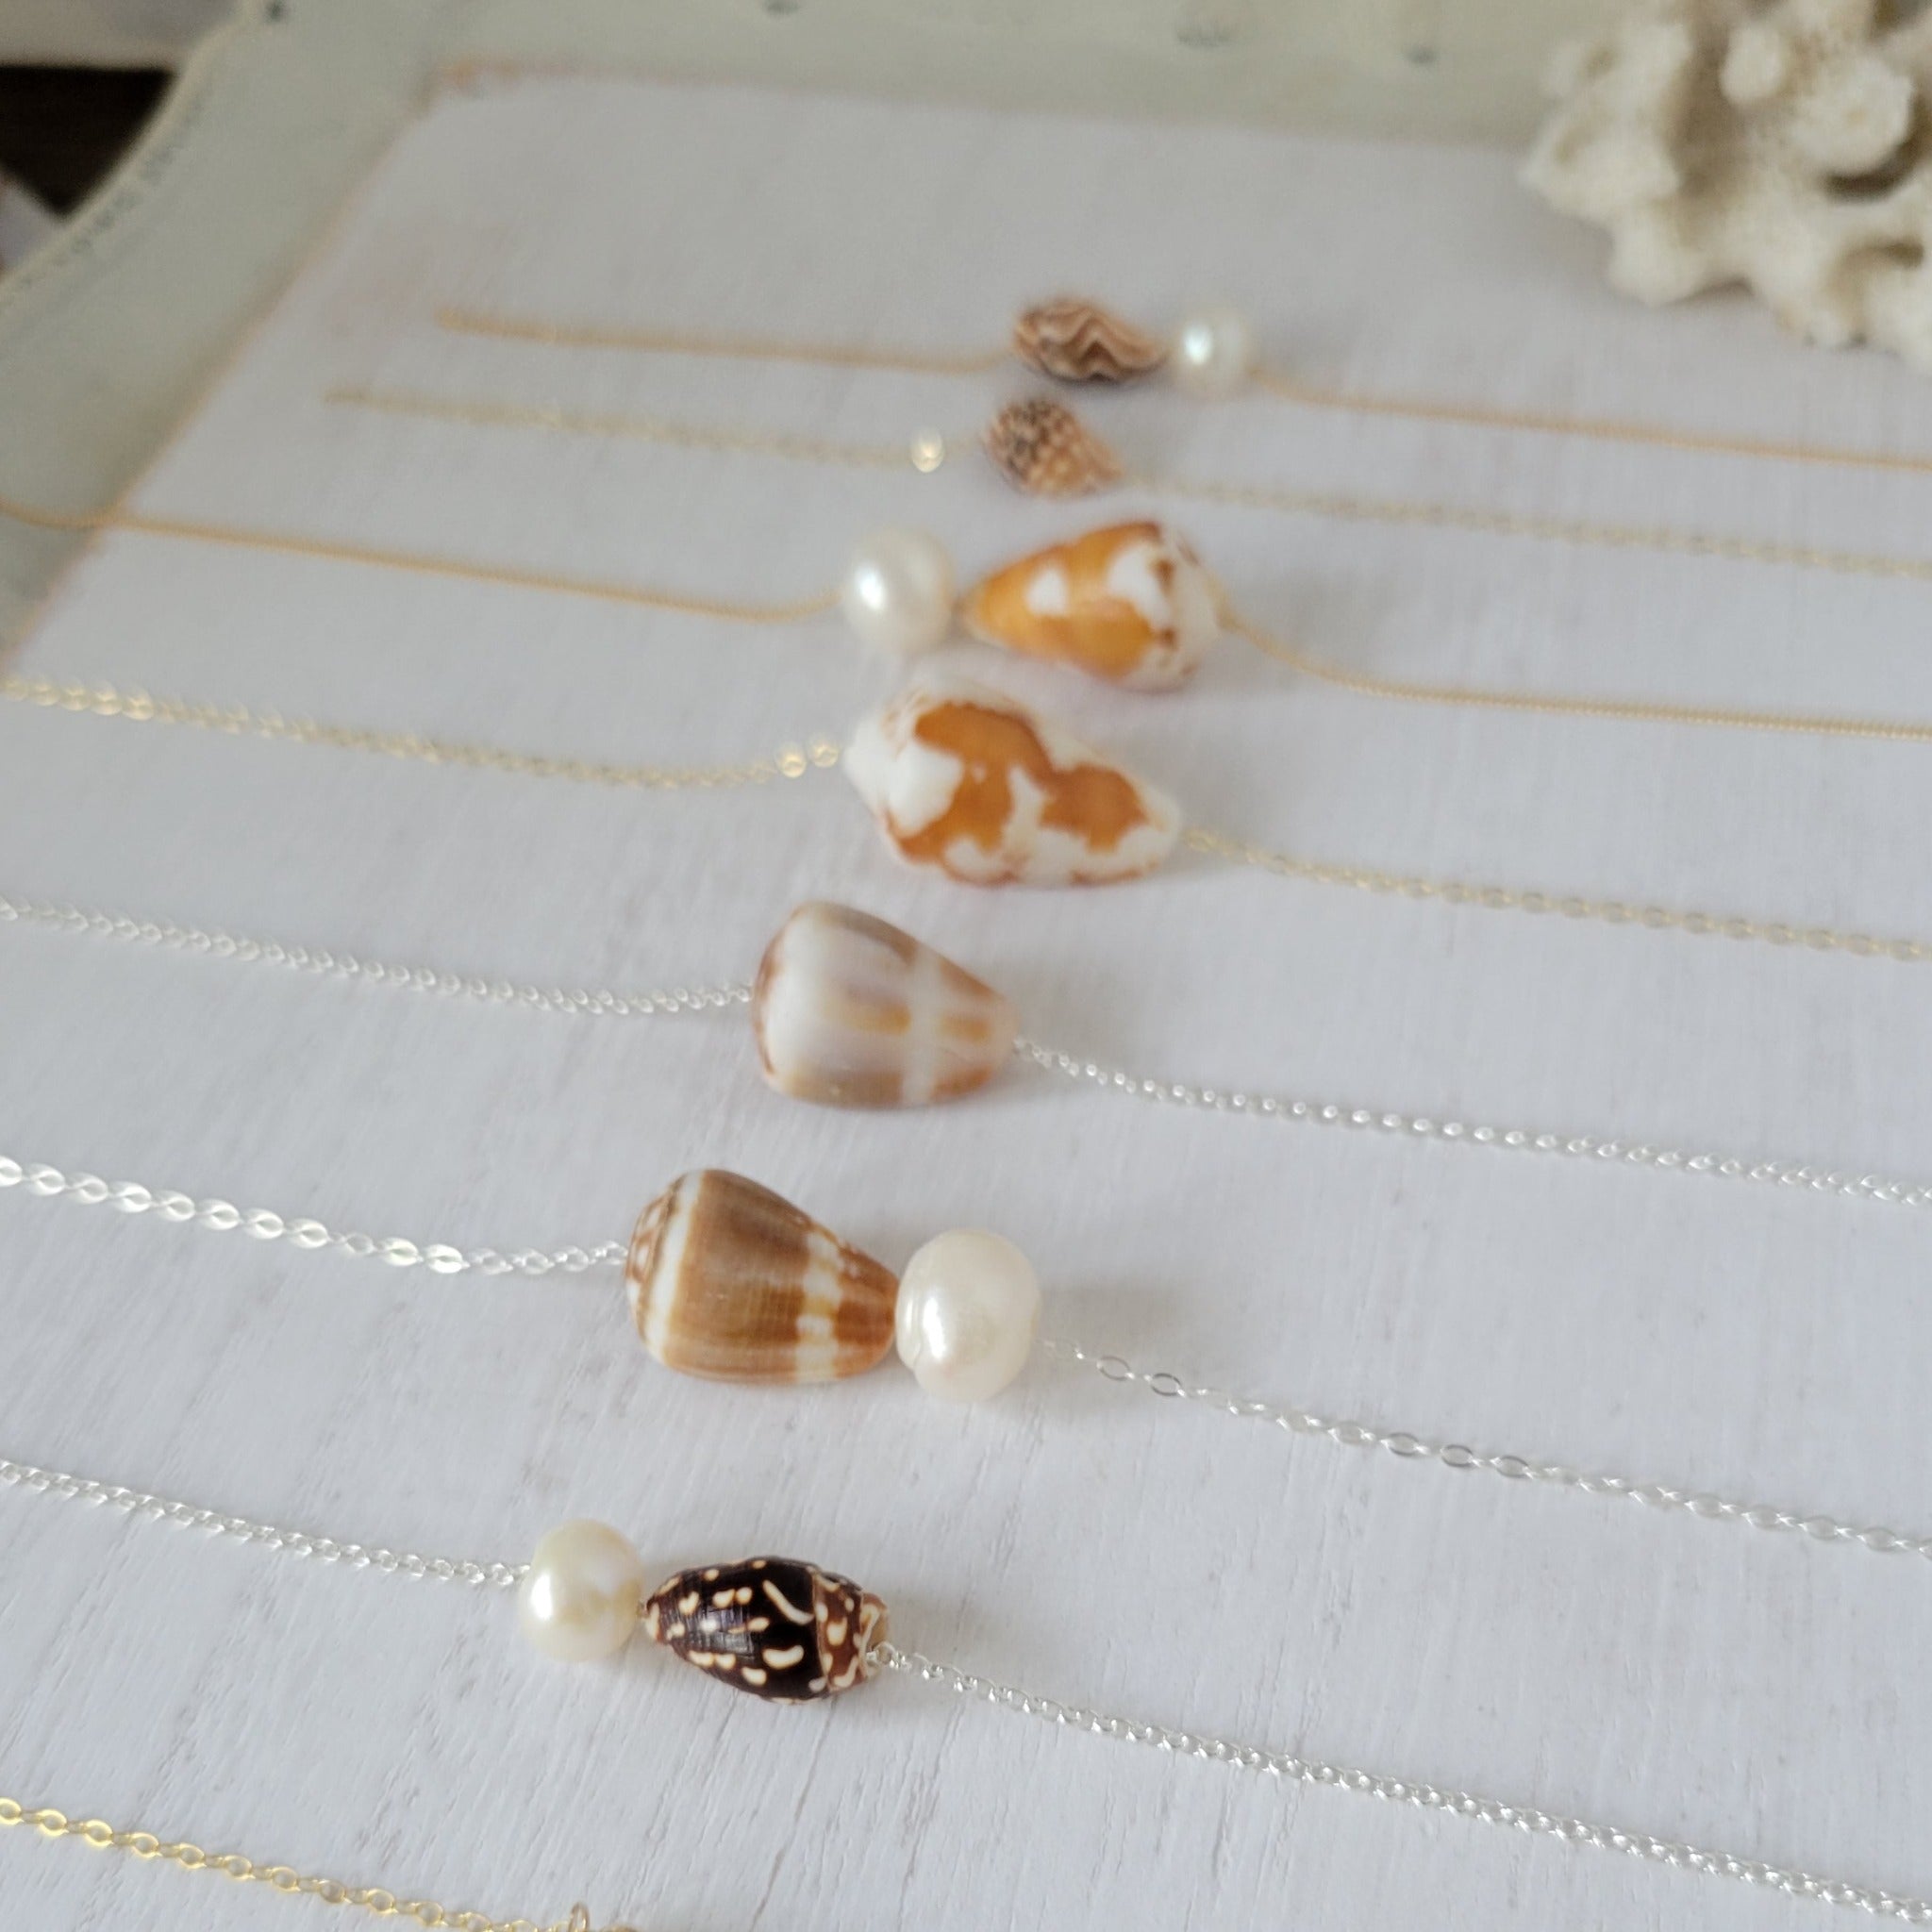 Aloha 2.0 Natural Shell and Pearl Necklace - Small, Med, or Large - Sterling or Gold